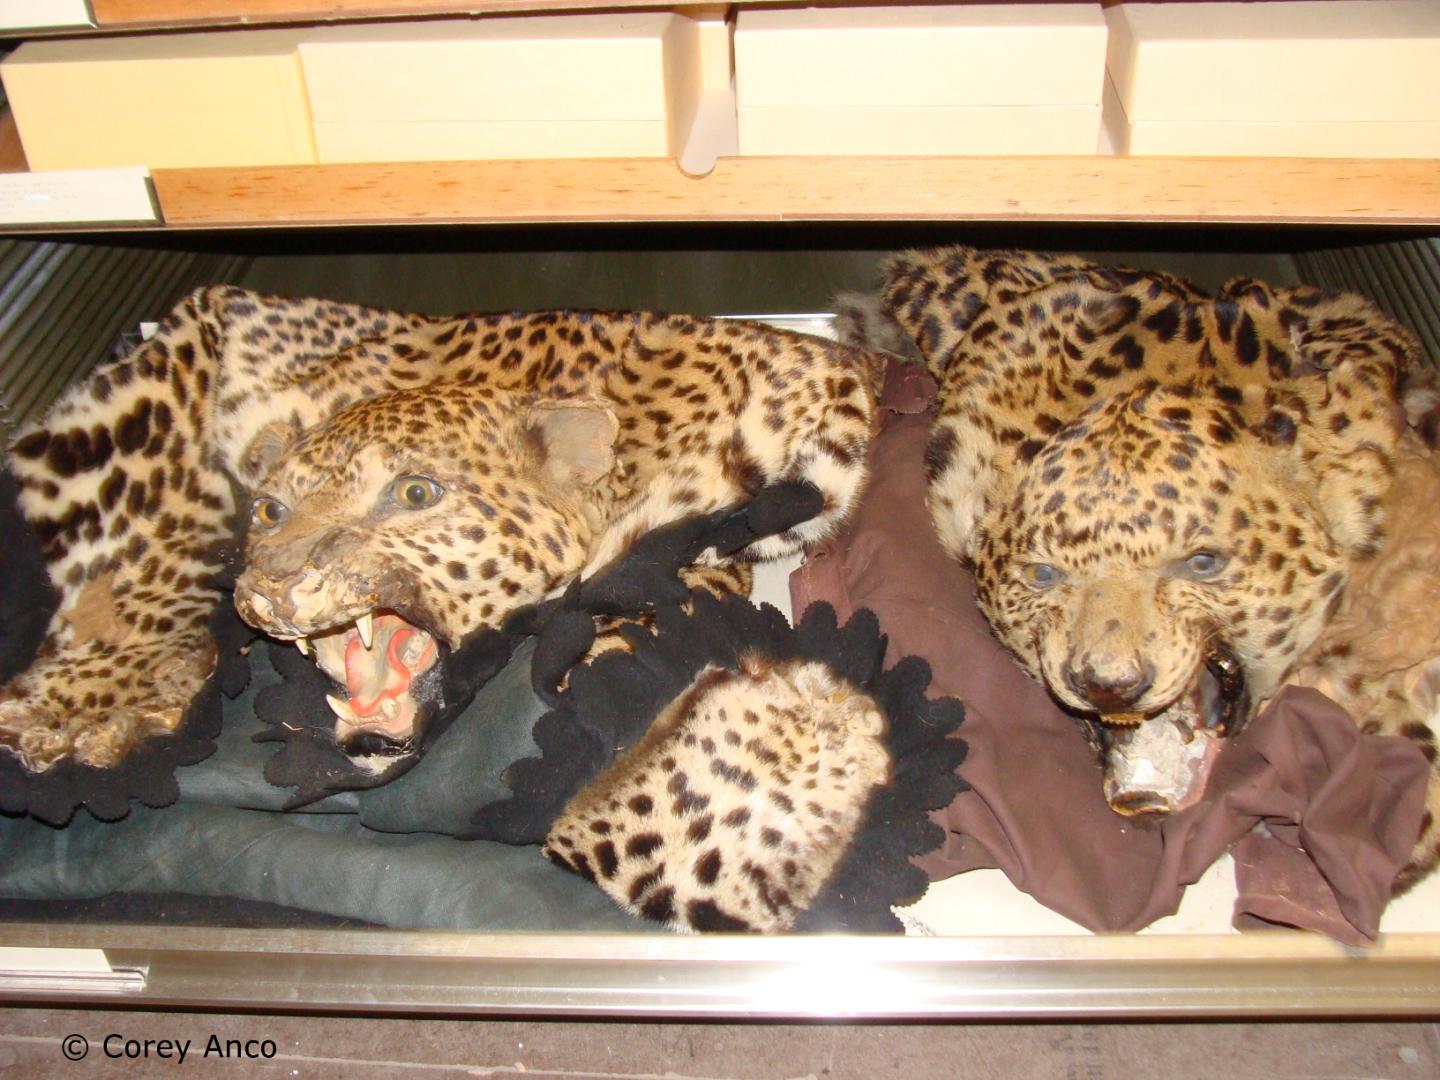 Leopard Parts Common in Illegal Trade